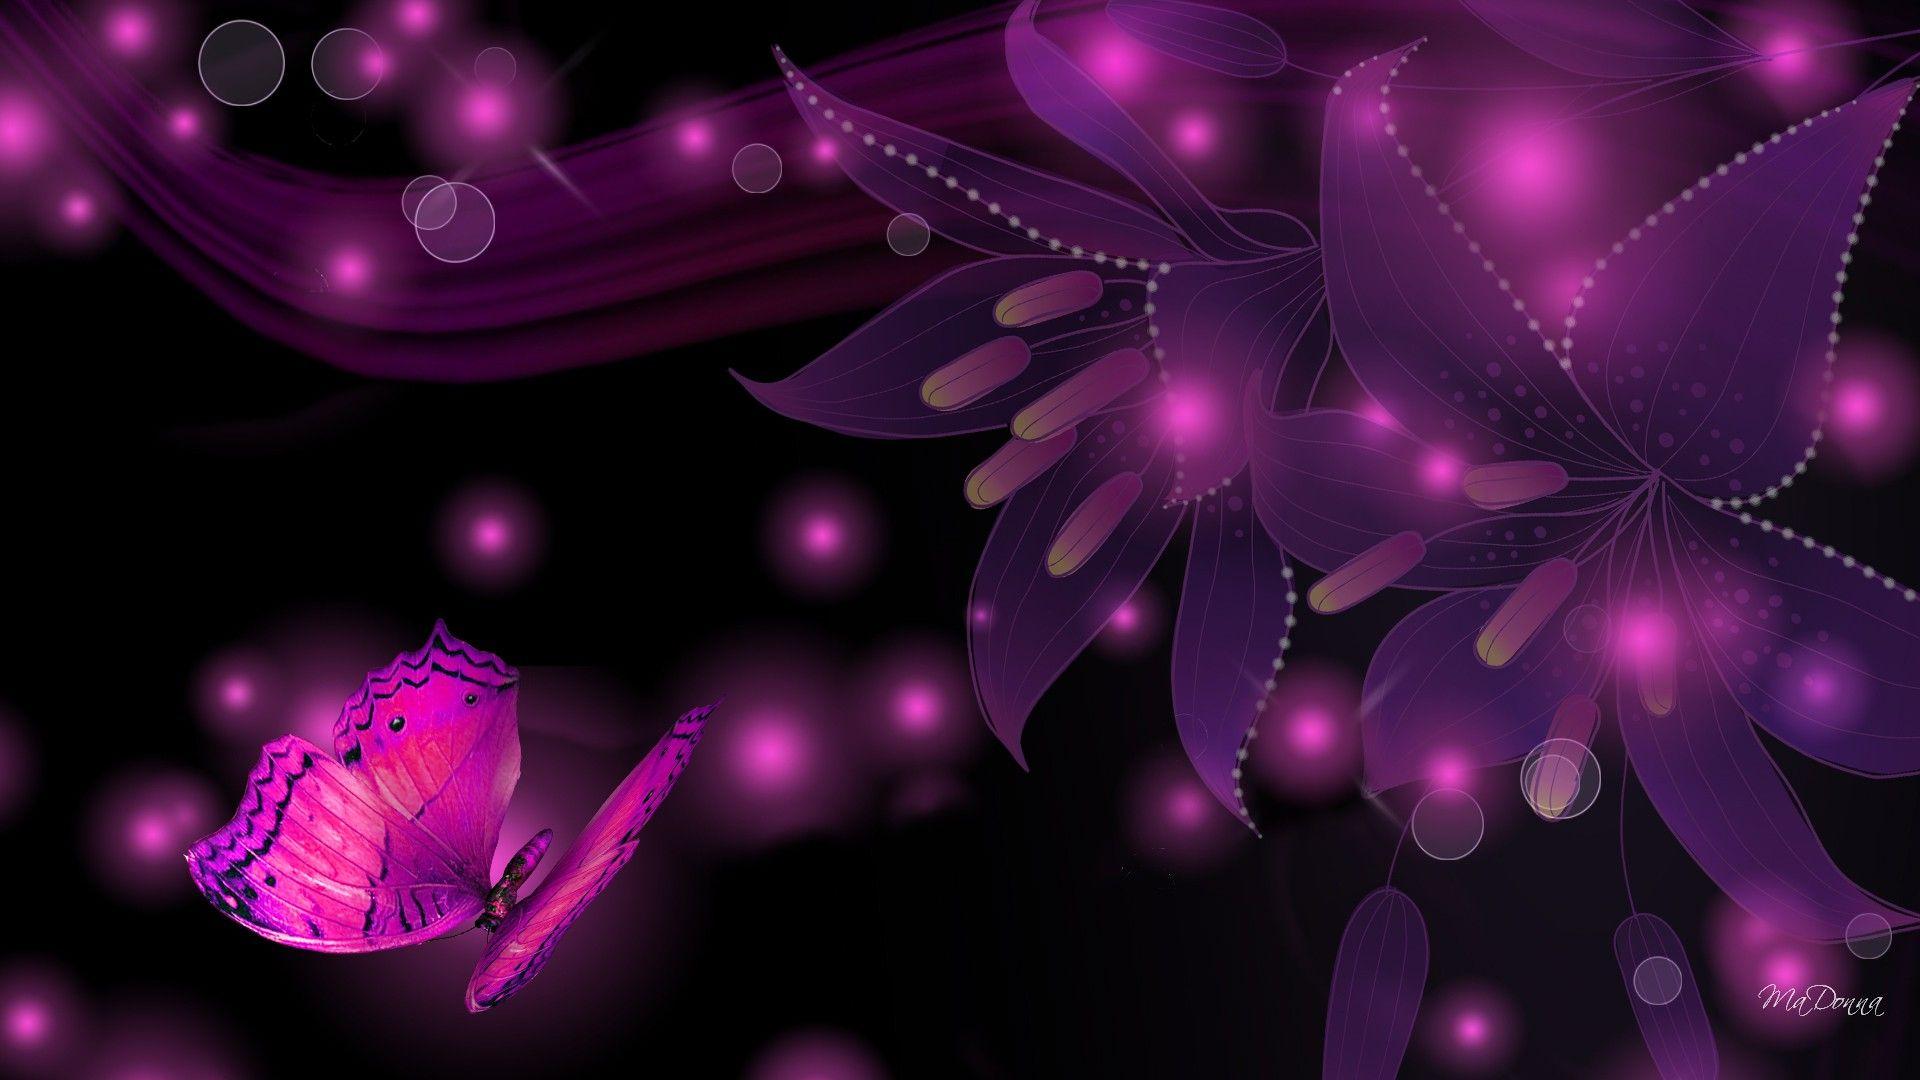 Beautiful Pink And Black Image & Wallpaper for PC & Mac, Tablet